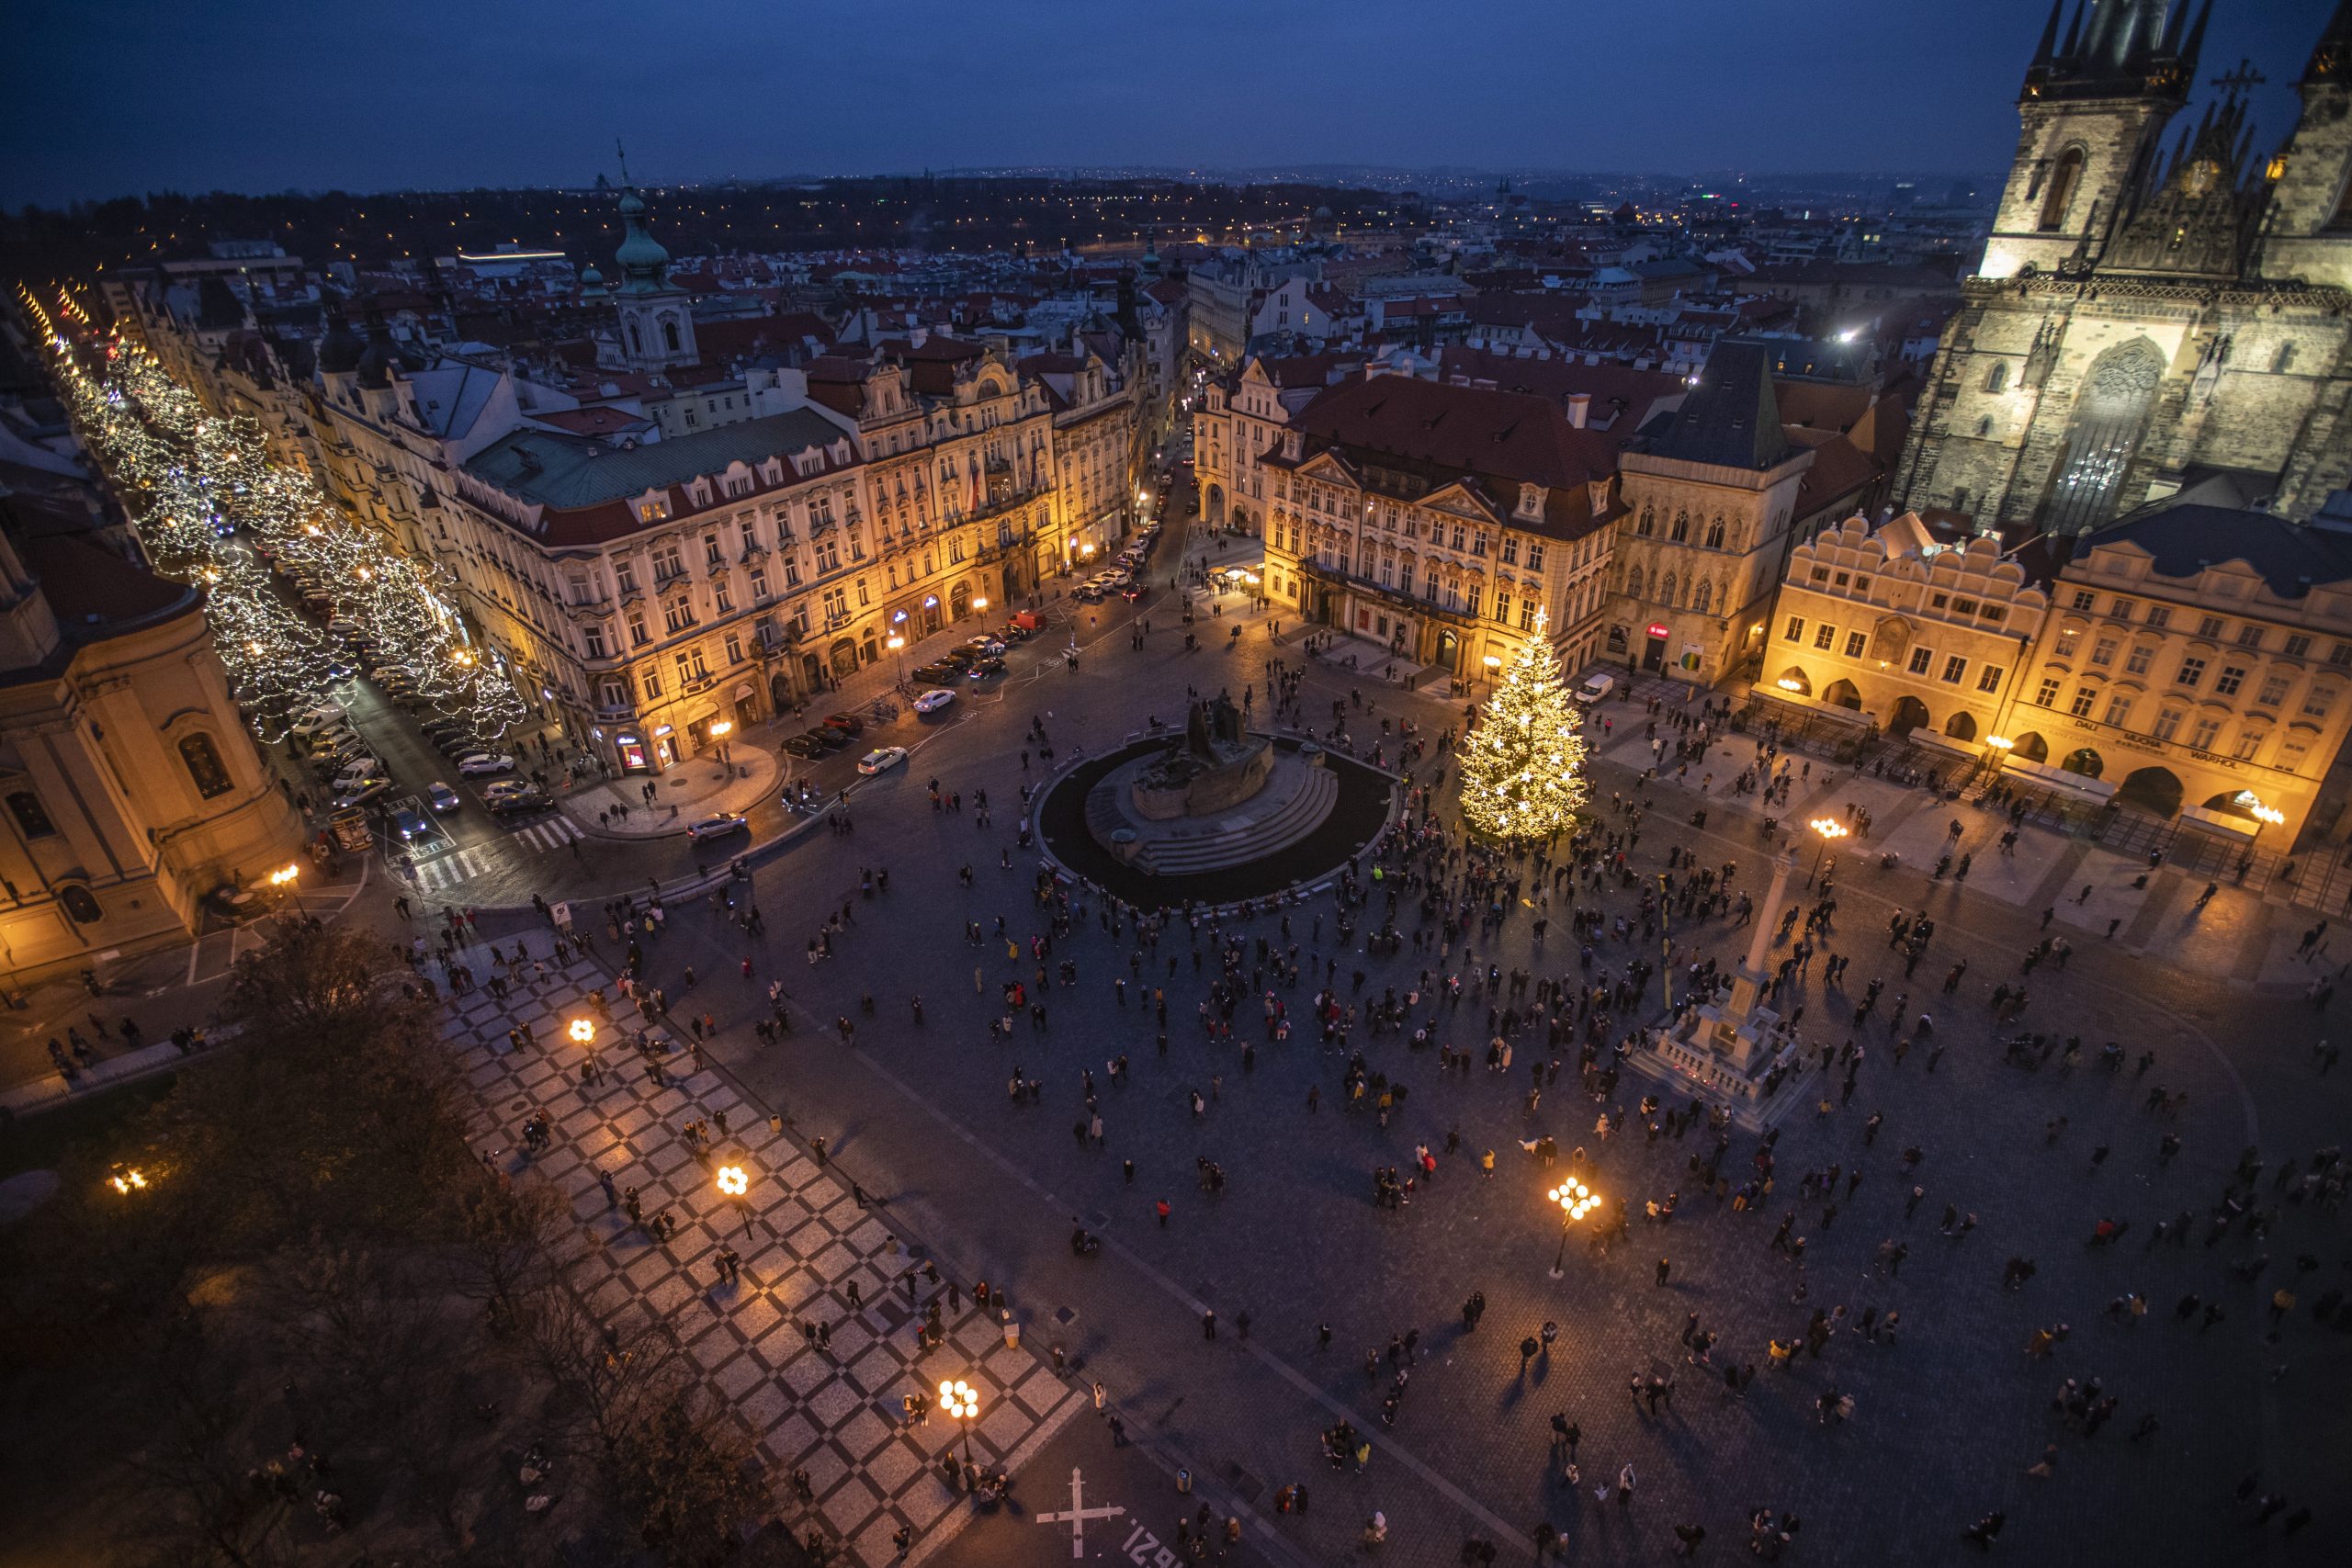 epa08849670 A general view of the illuminated Old Town Square with a Christmas tree in Prague, Czech Republic, 28 November 2020. The largest Christmas market at the Old Town Square in Czech capital was cancelled due to the coronovirus pandemic measures. The only Christmas tree is standing on the square and was light up on first Advent weekend.  EPA/MARTIN DIVISEK